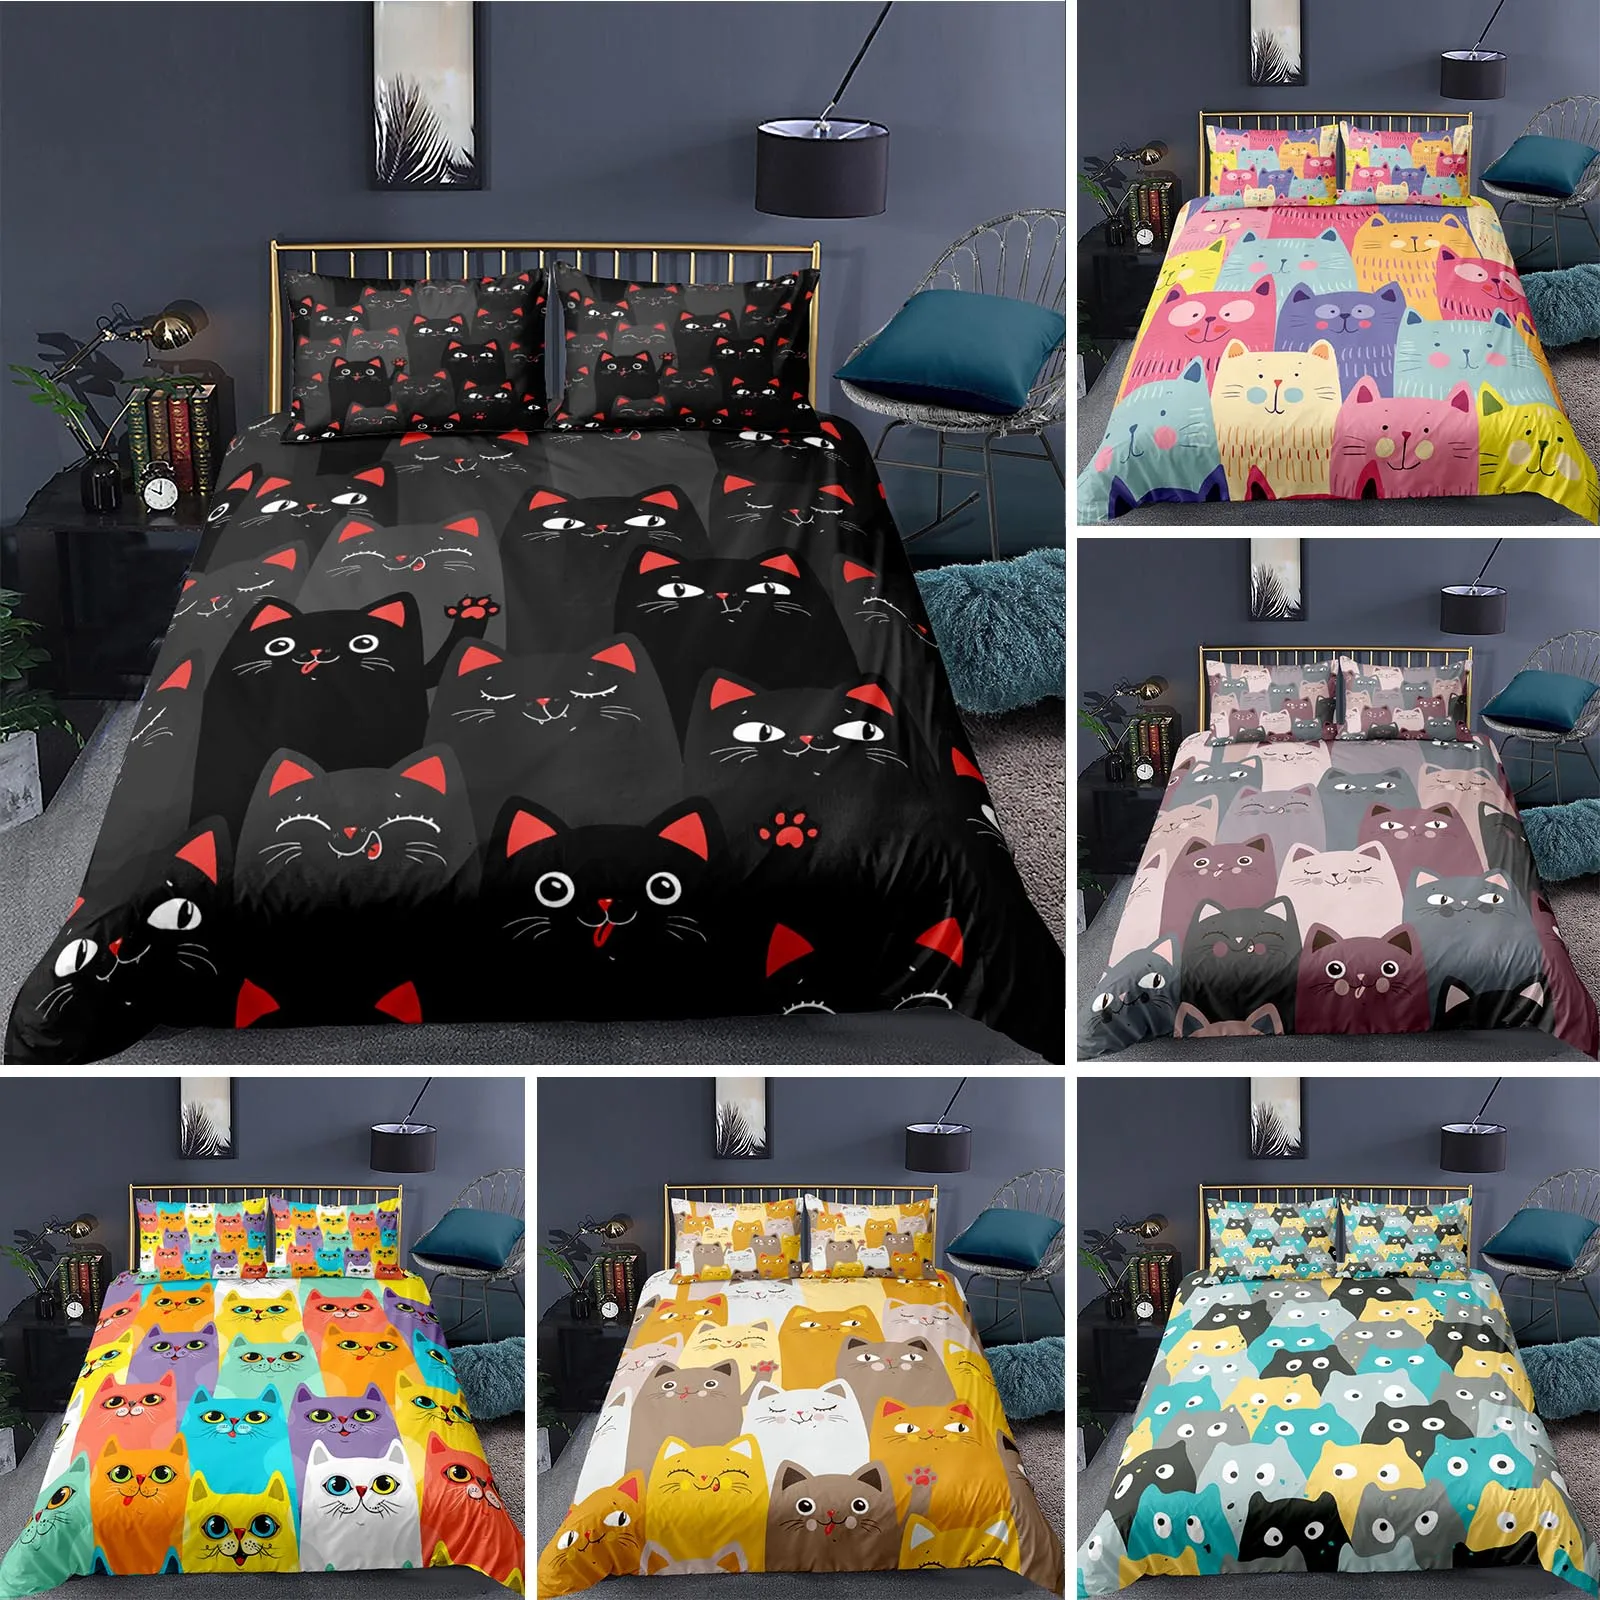 

Cat Duvet Cover Polyester Pattern with Hipster Playful Feline Characters, Decorative 3 Piece Twin Bedding Set with 2 Pillow Sham